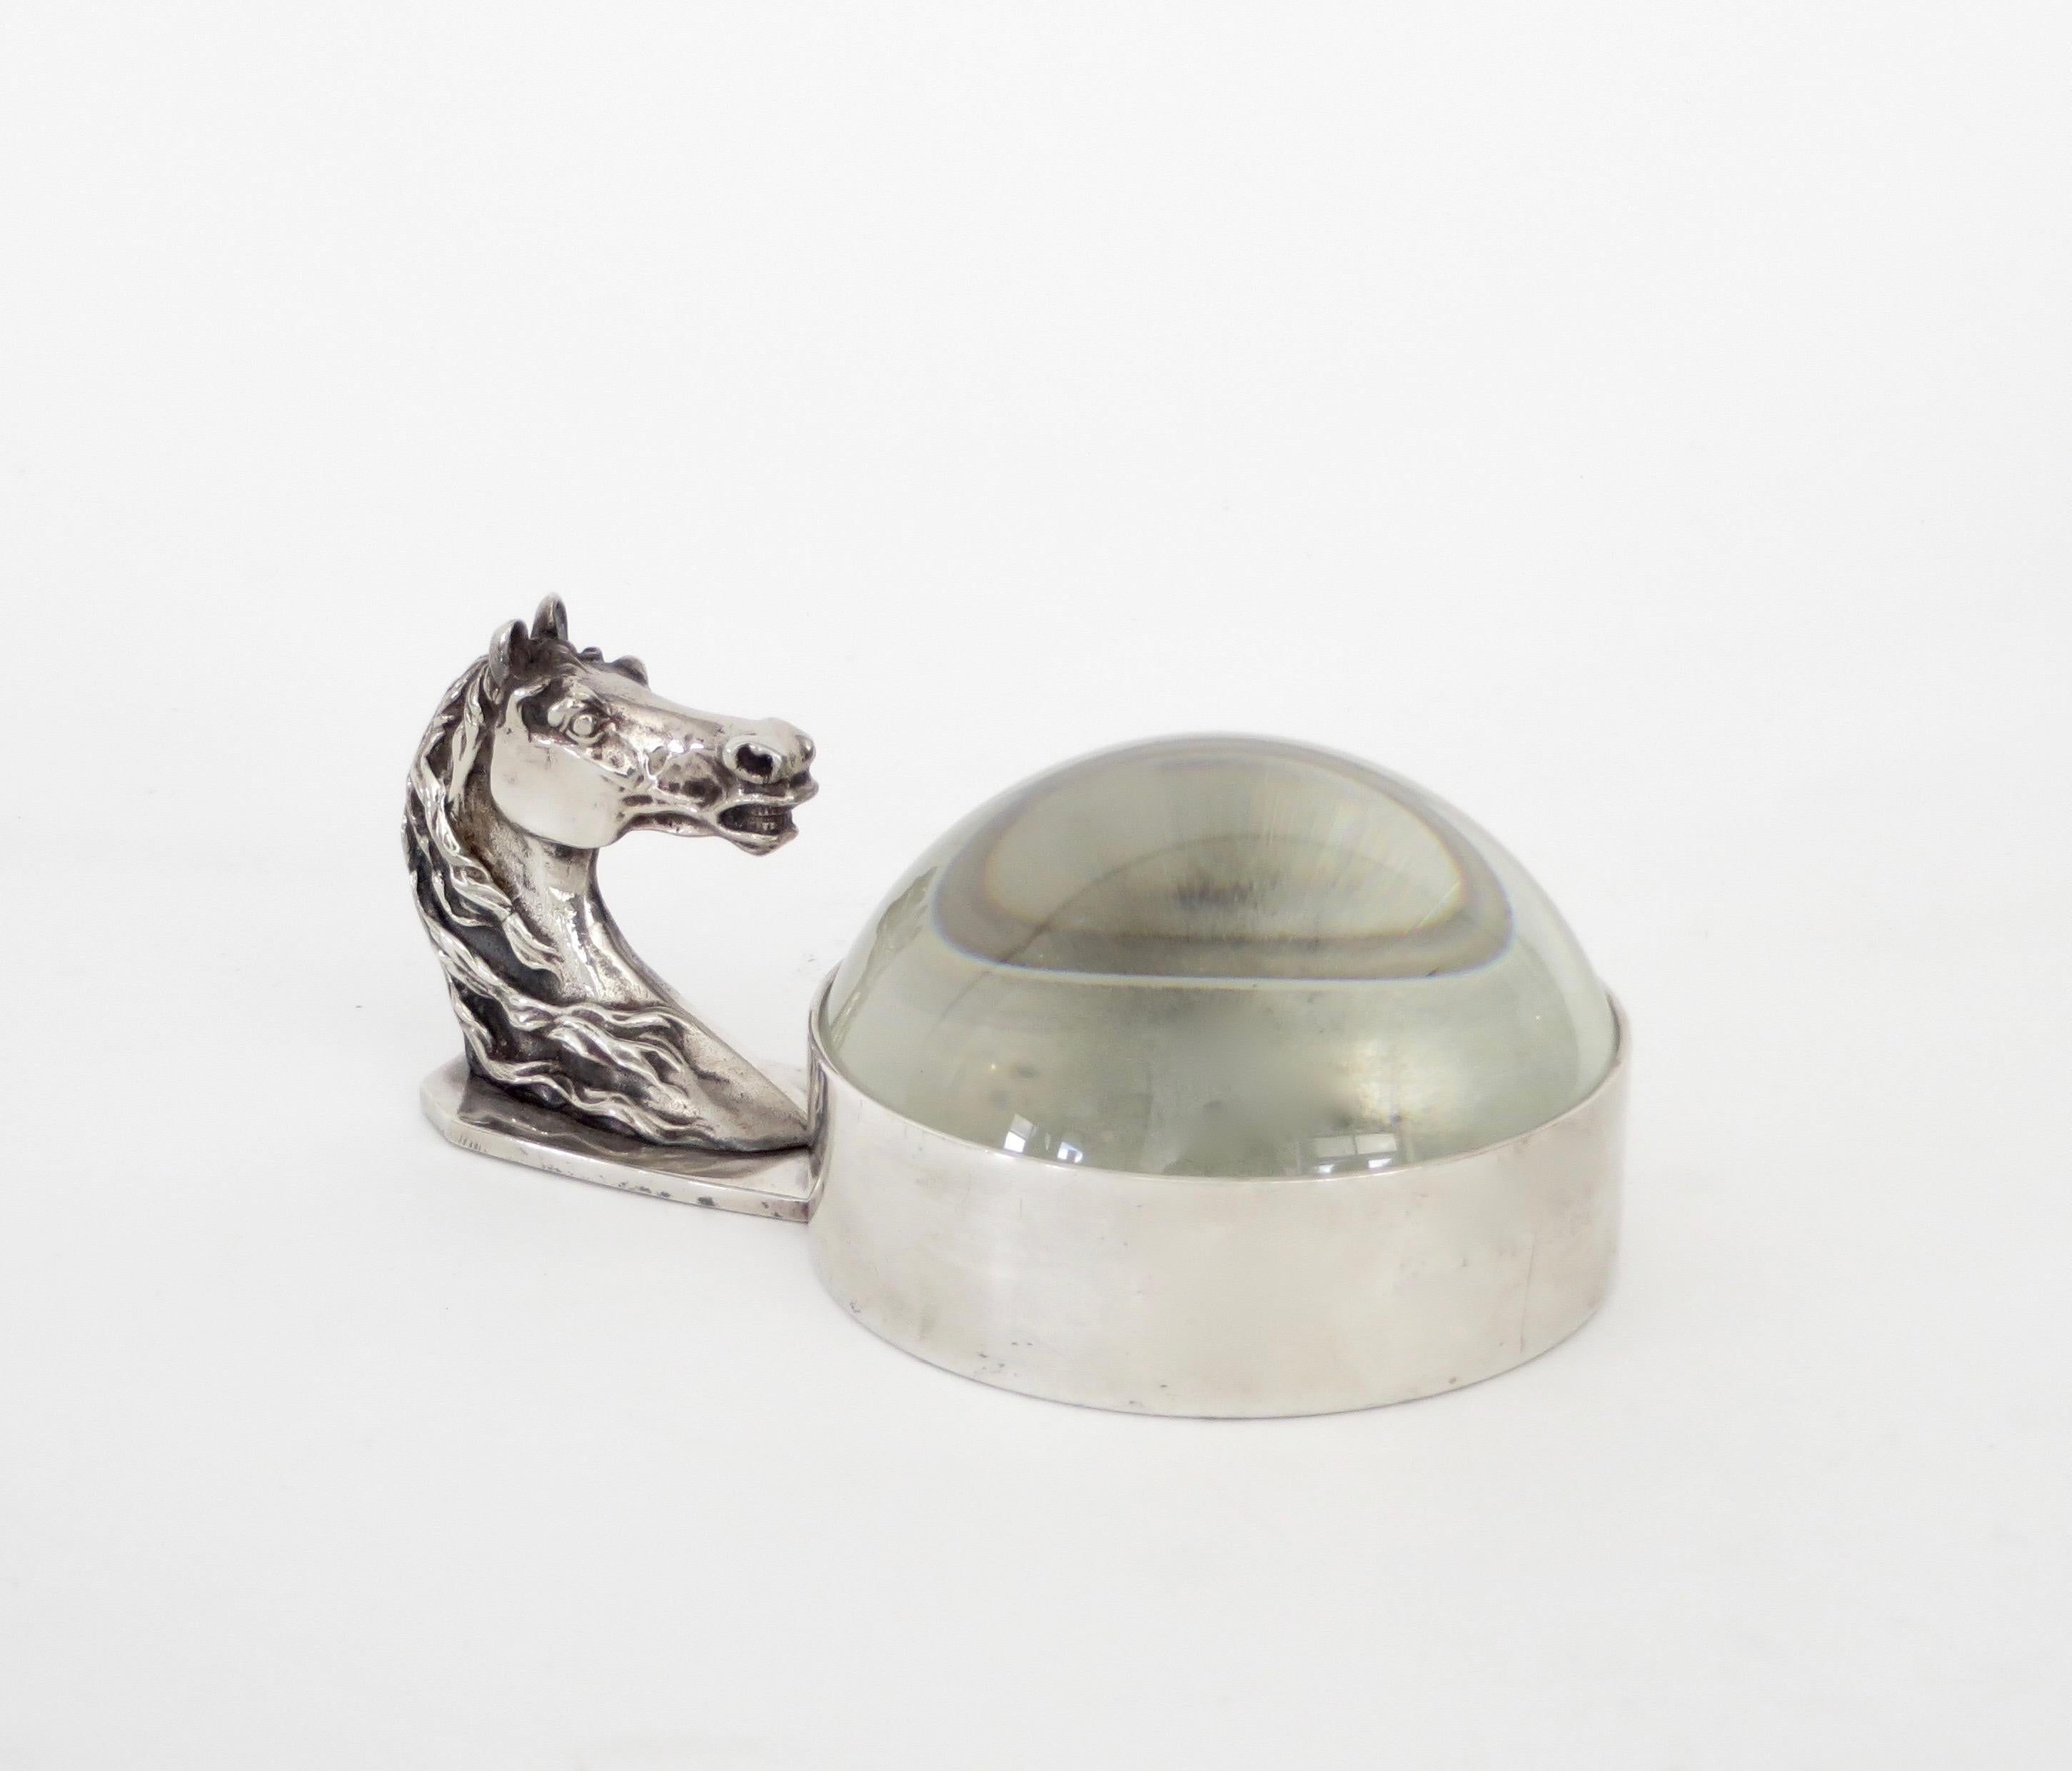 Hermes French silver plate equestrian horse motif desk magnifier.
Also can be used as a paperweight or simply as a wonderful accessory,
circa 1970.
Excellent condition with stamps of Hermes, Paris.